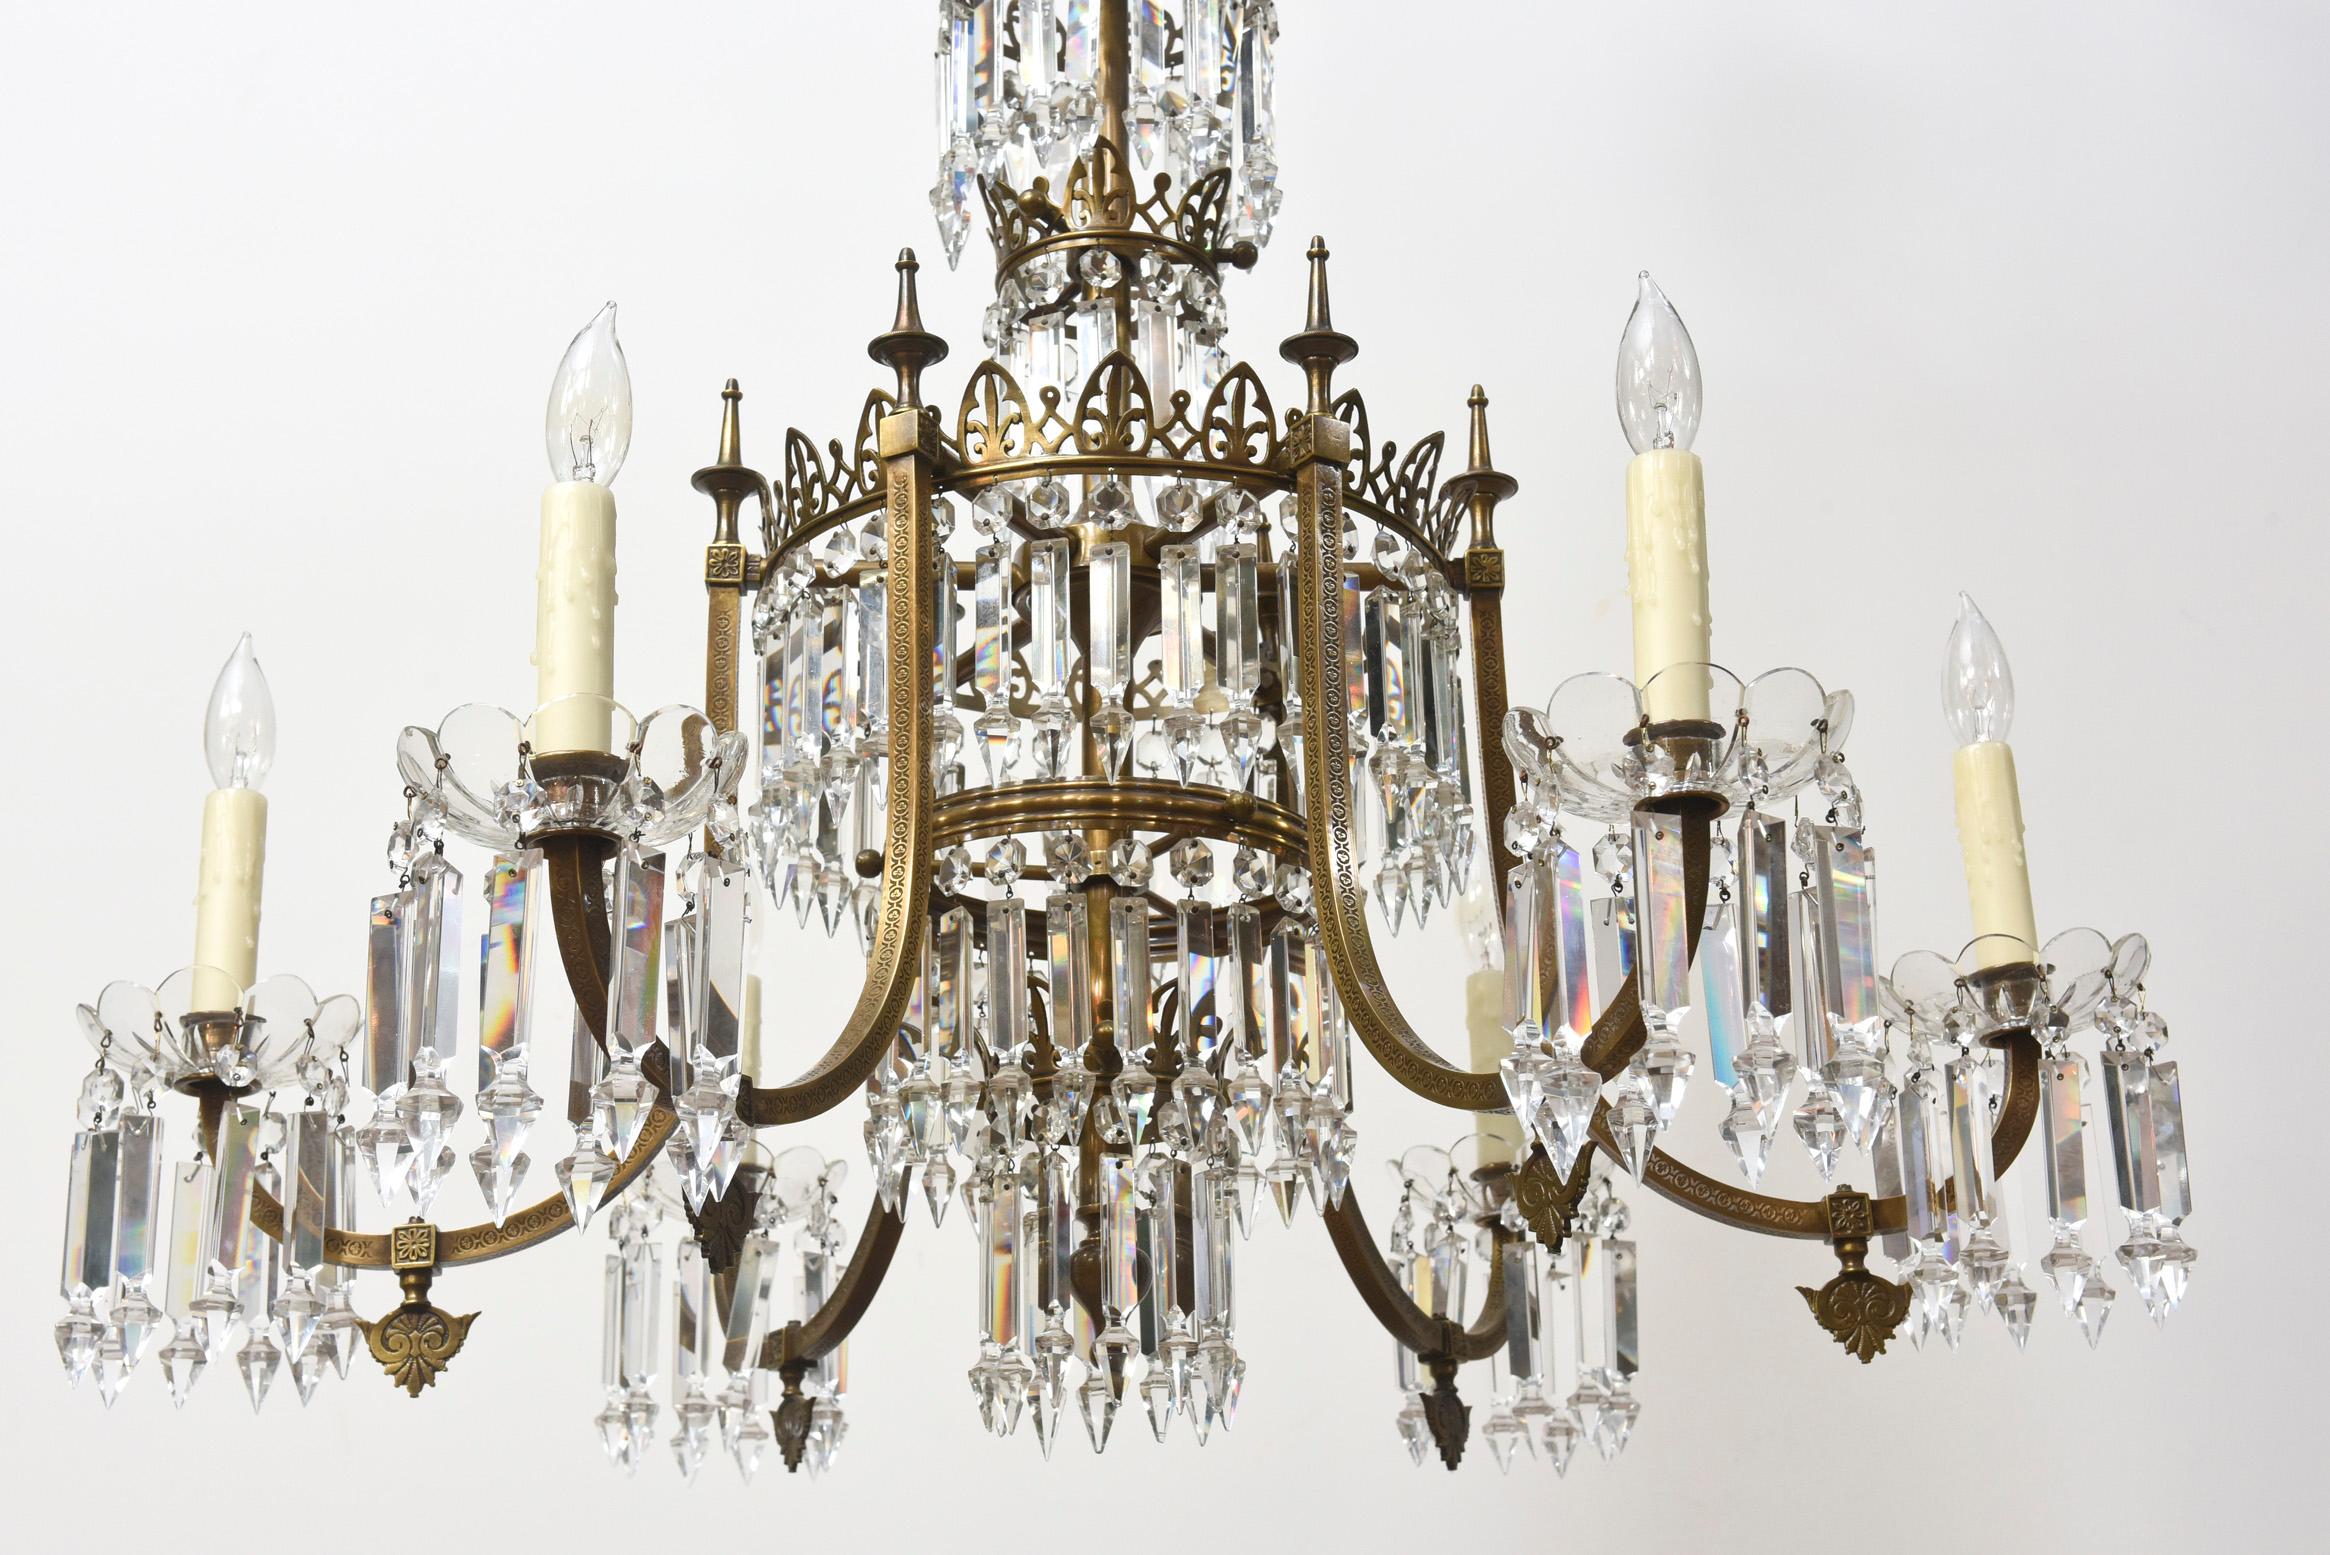 Pair of six arm brass and crystal chandeliers. Six tiers of crystals around the central stem. Stamped brass square tubing on arms topped with urns. Crown details on each ring. Original Chandeliers from a property on Lewisburg Square, Boston.